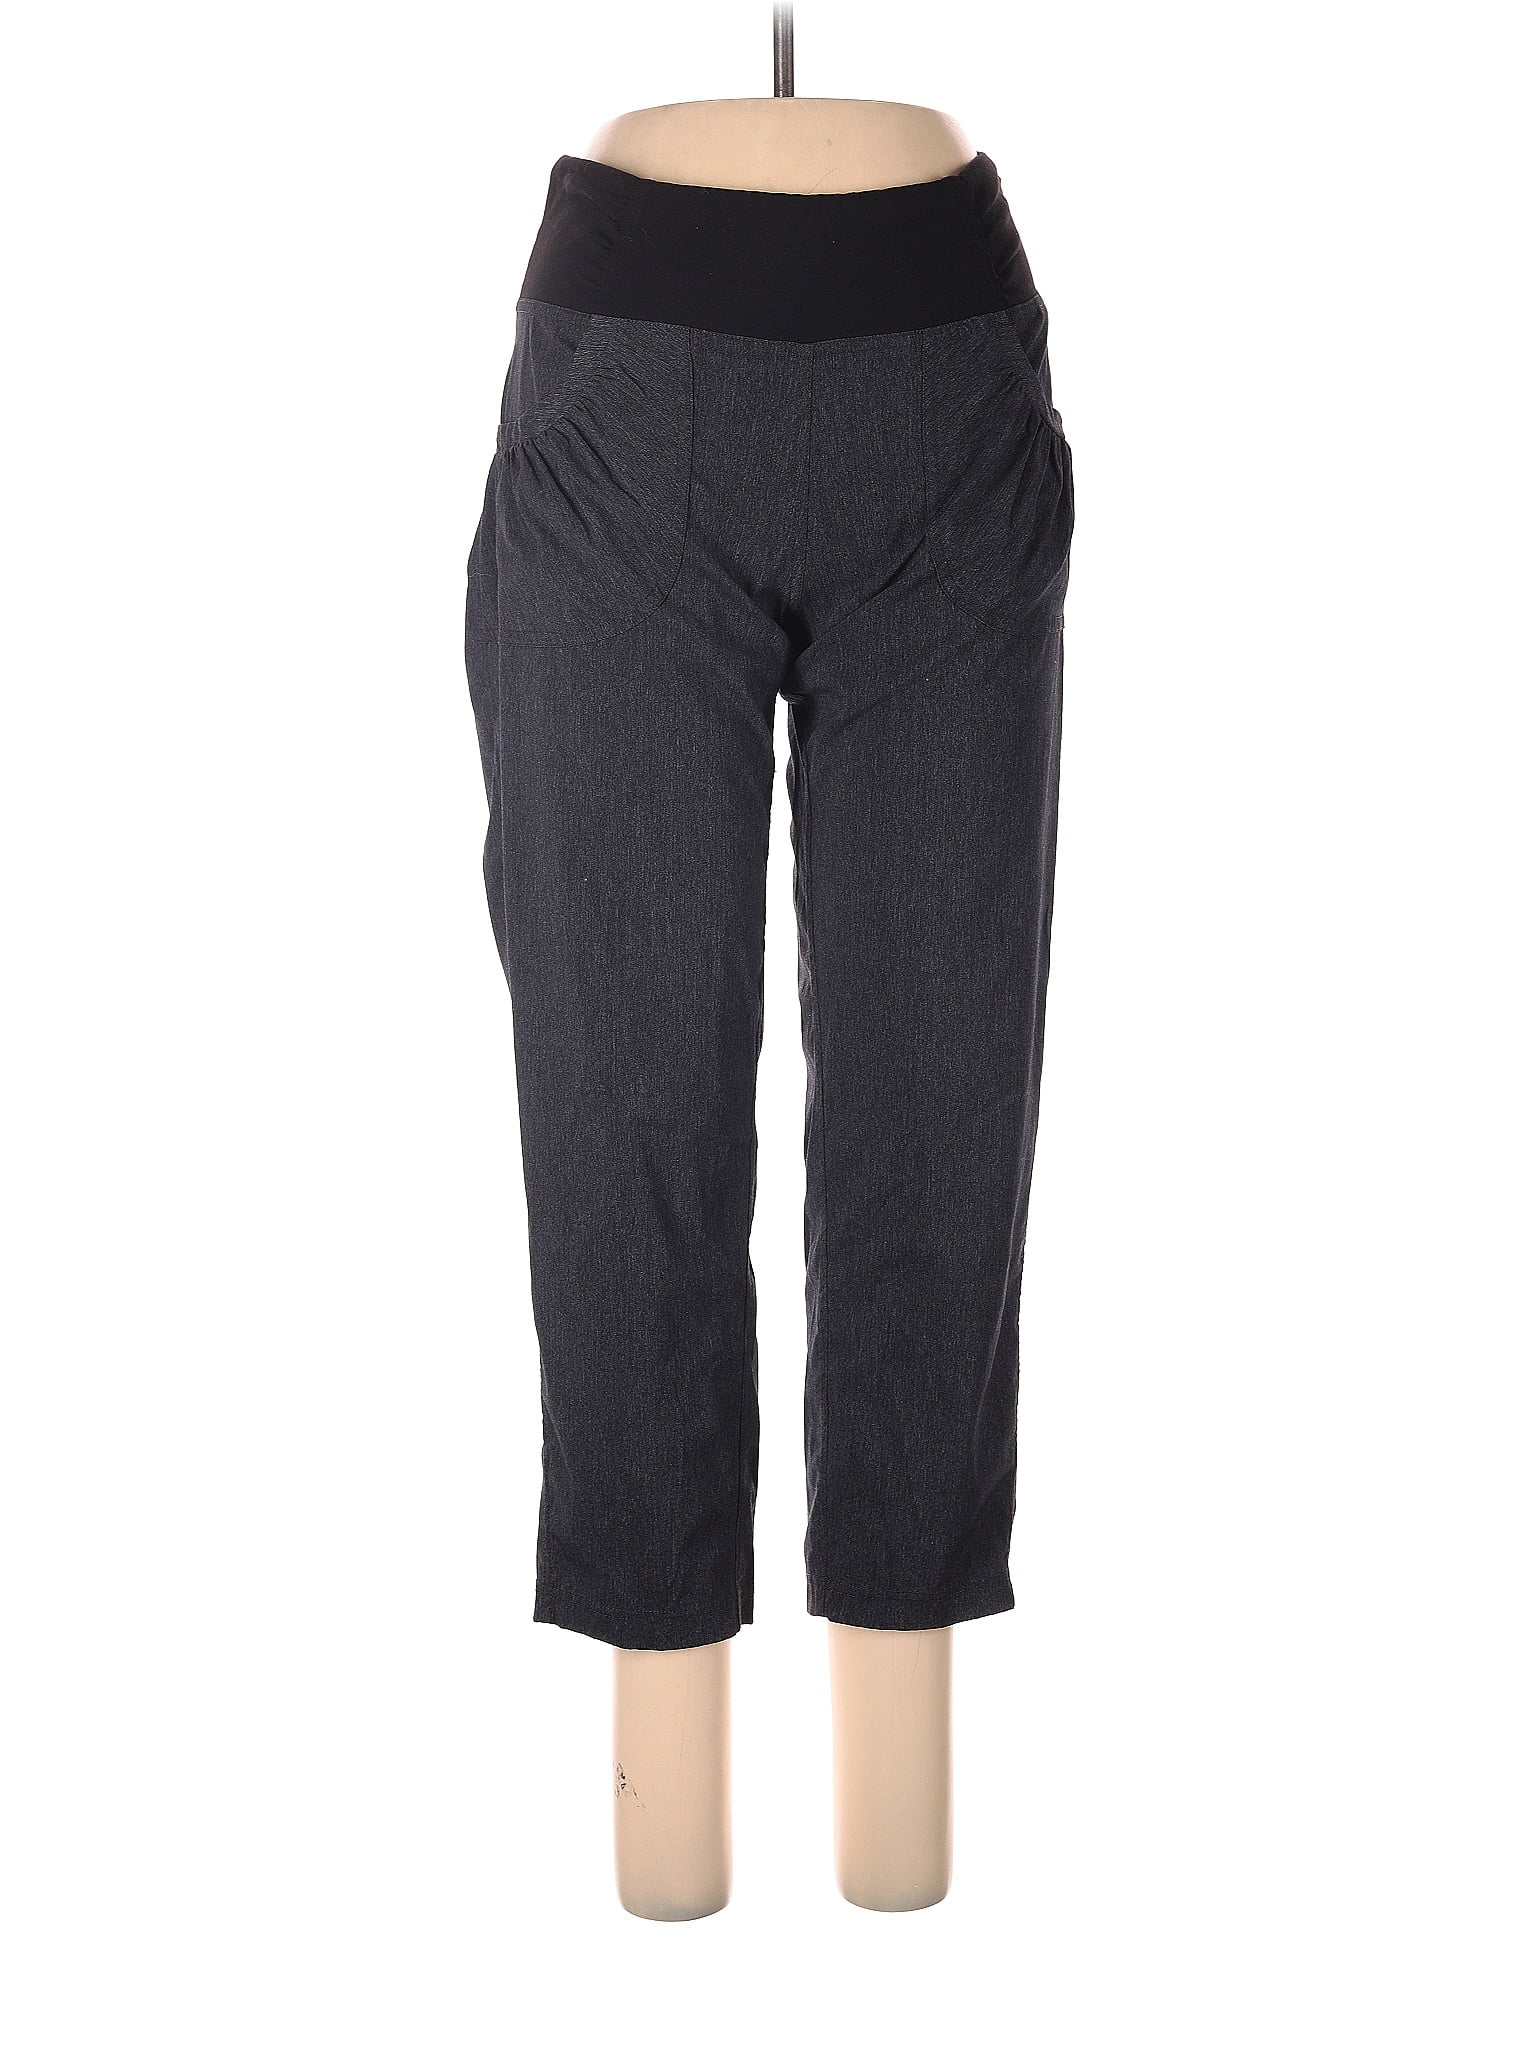 Zyia Active Gray Active Pants Size 8 - 10 - 63% off